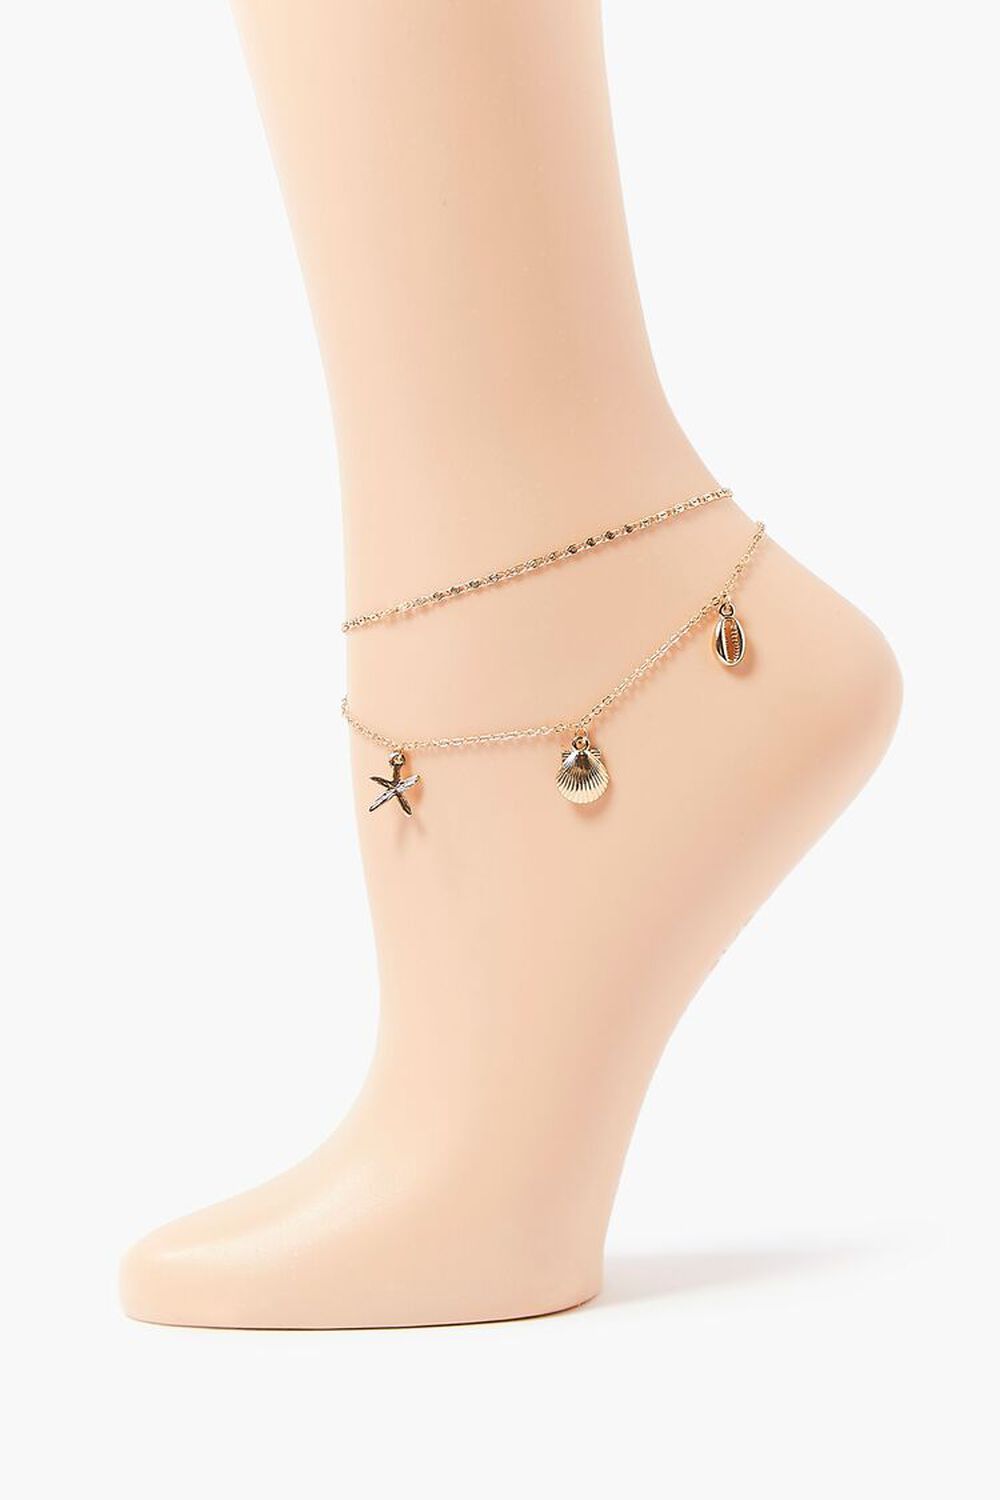 GOLD Seashell Charm Layered Anklet, image 1